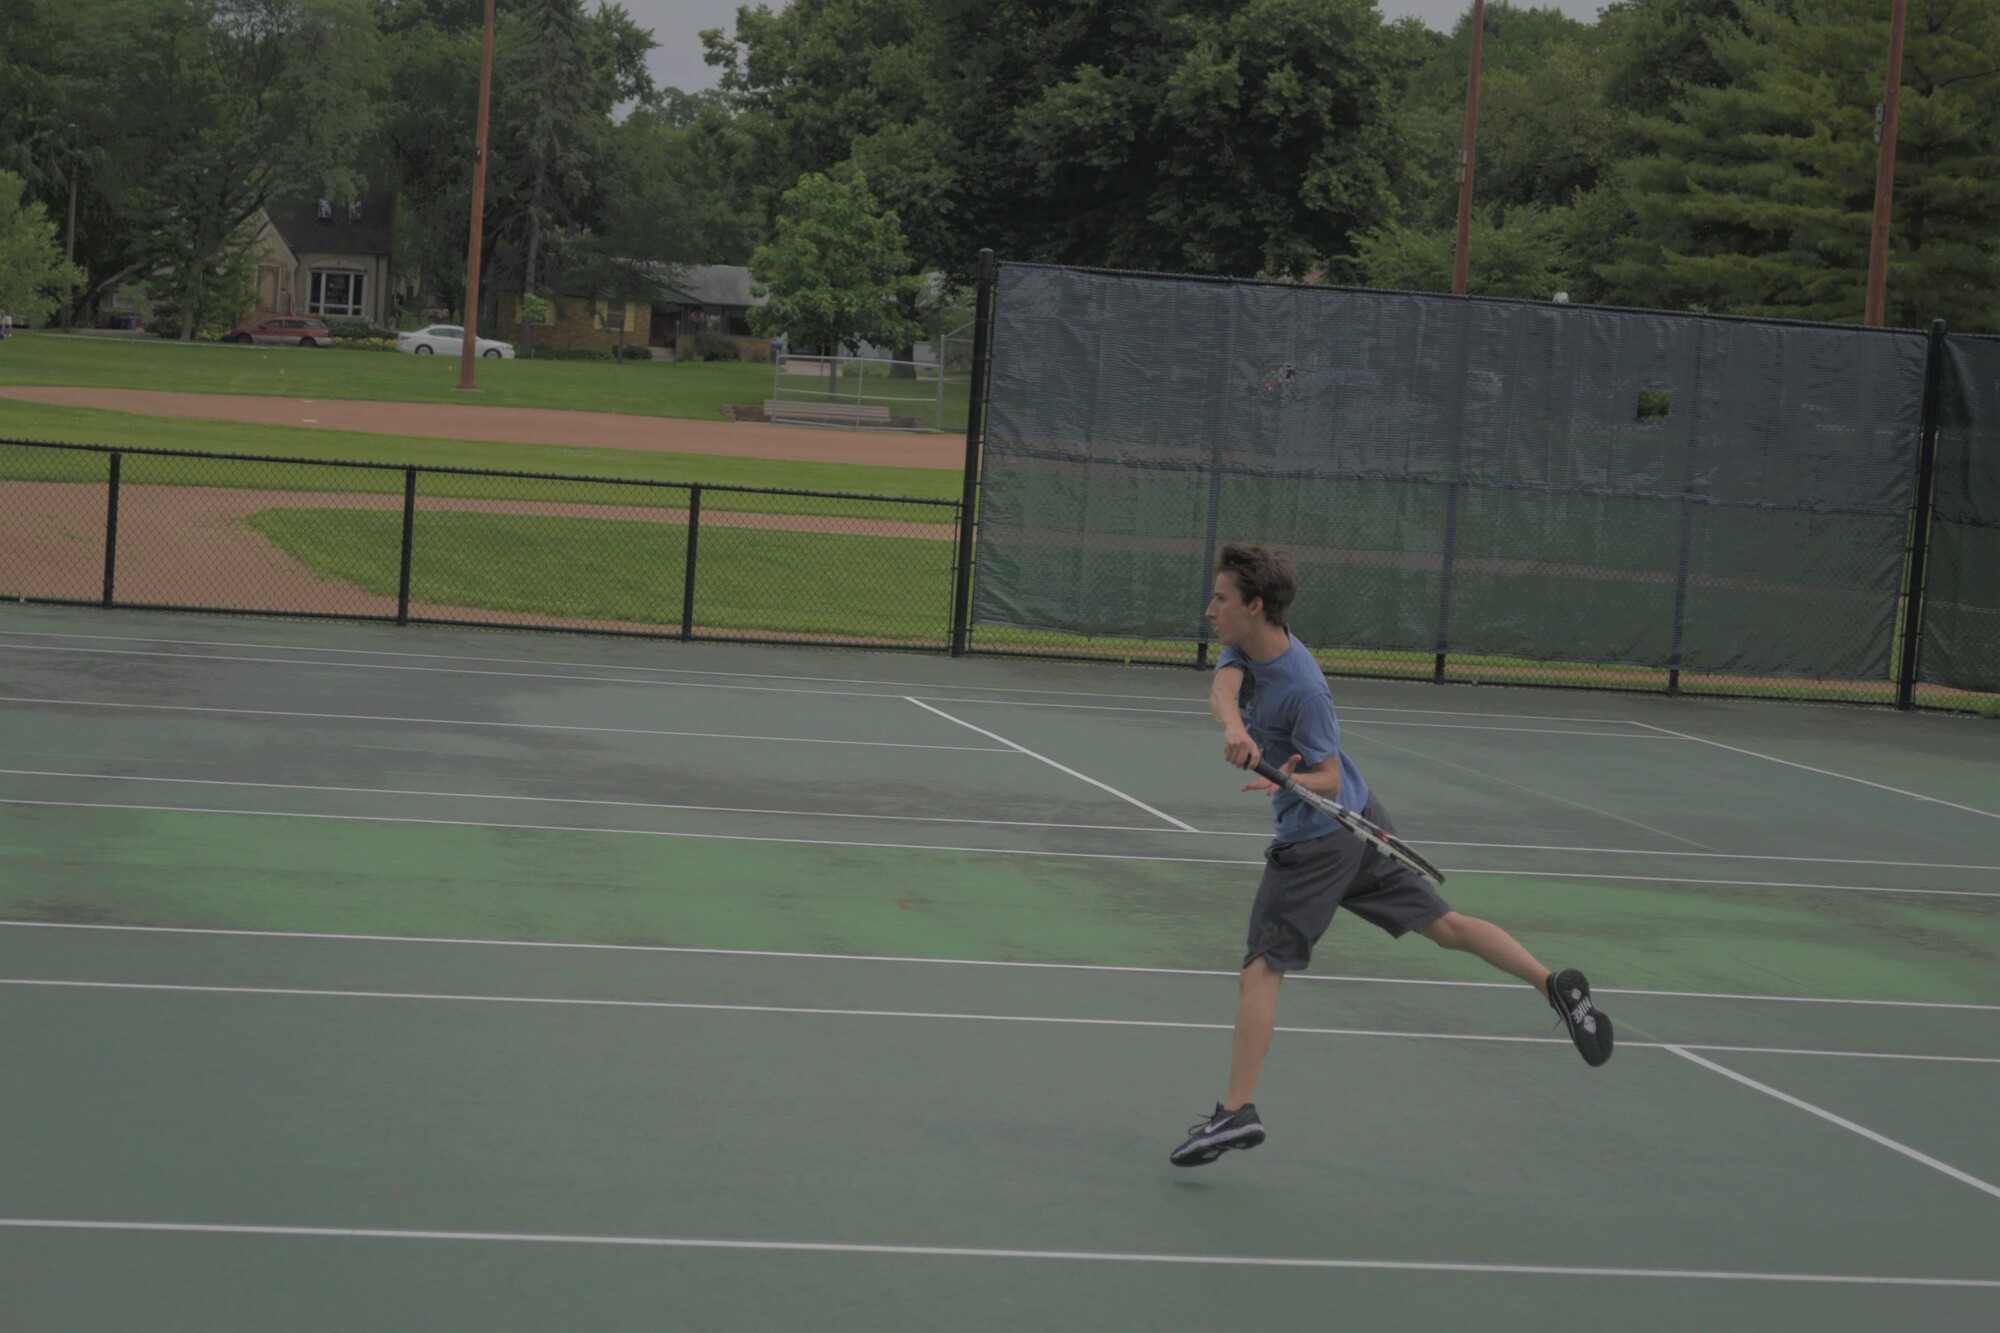 Tennis Lessons in St Louis Park MN Kids BeginnerPrivate